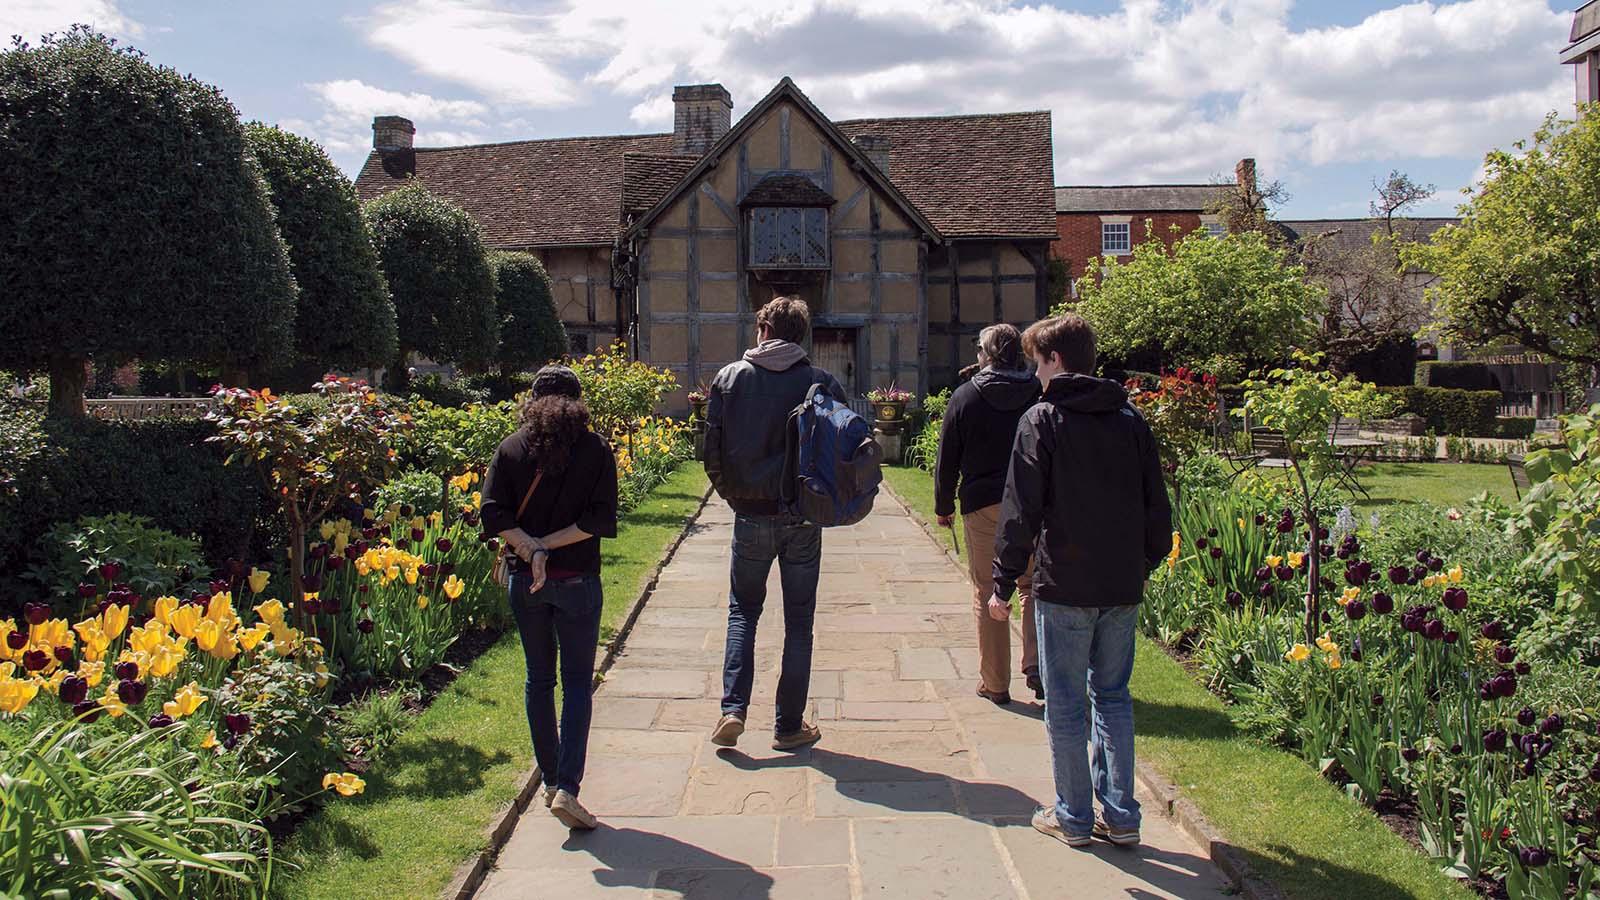 Students exploring William Shakespeare’s childhood home in the heart of Stratford-upon-Avon on a faculty-led trip